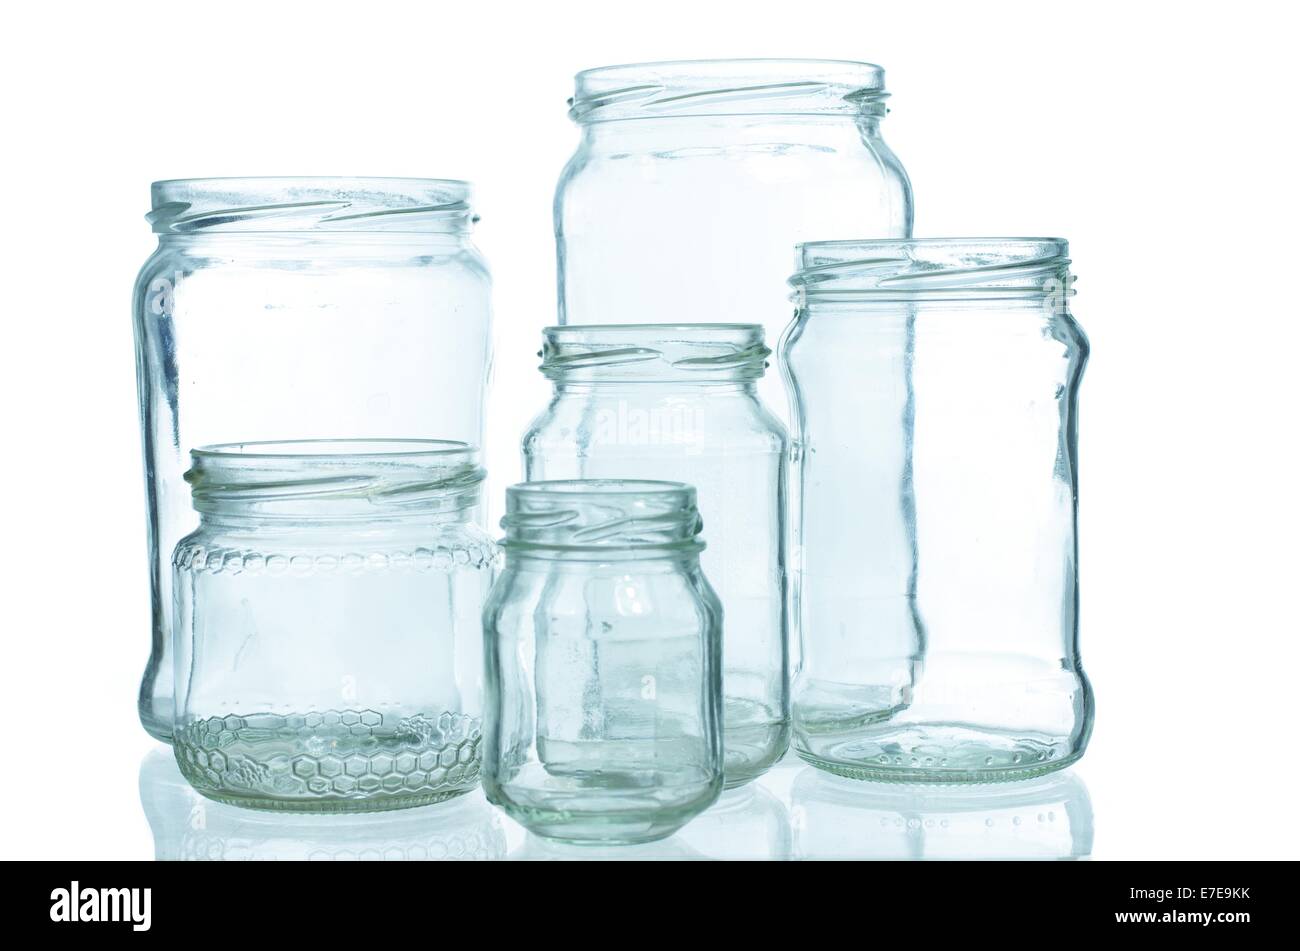 Tall Empty Glass Jar With Lid Stock Photo - Download Image Now